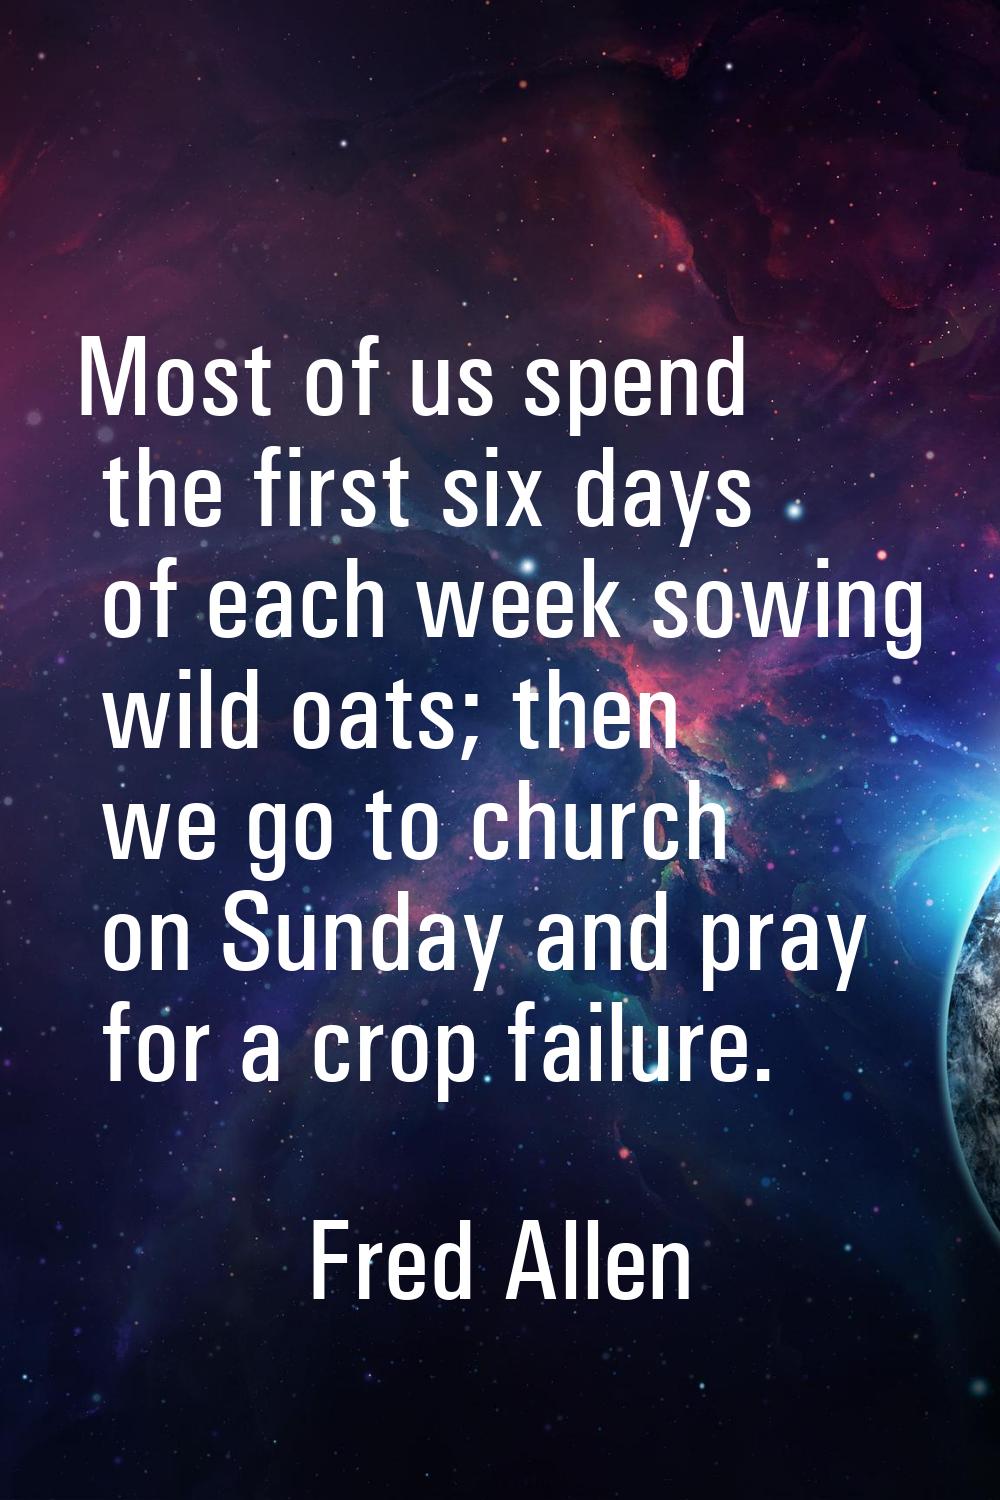 Most of us spend the first six days of each week sowing wild oats; then we go to church on Sunday a